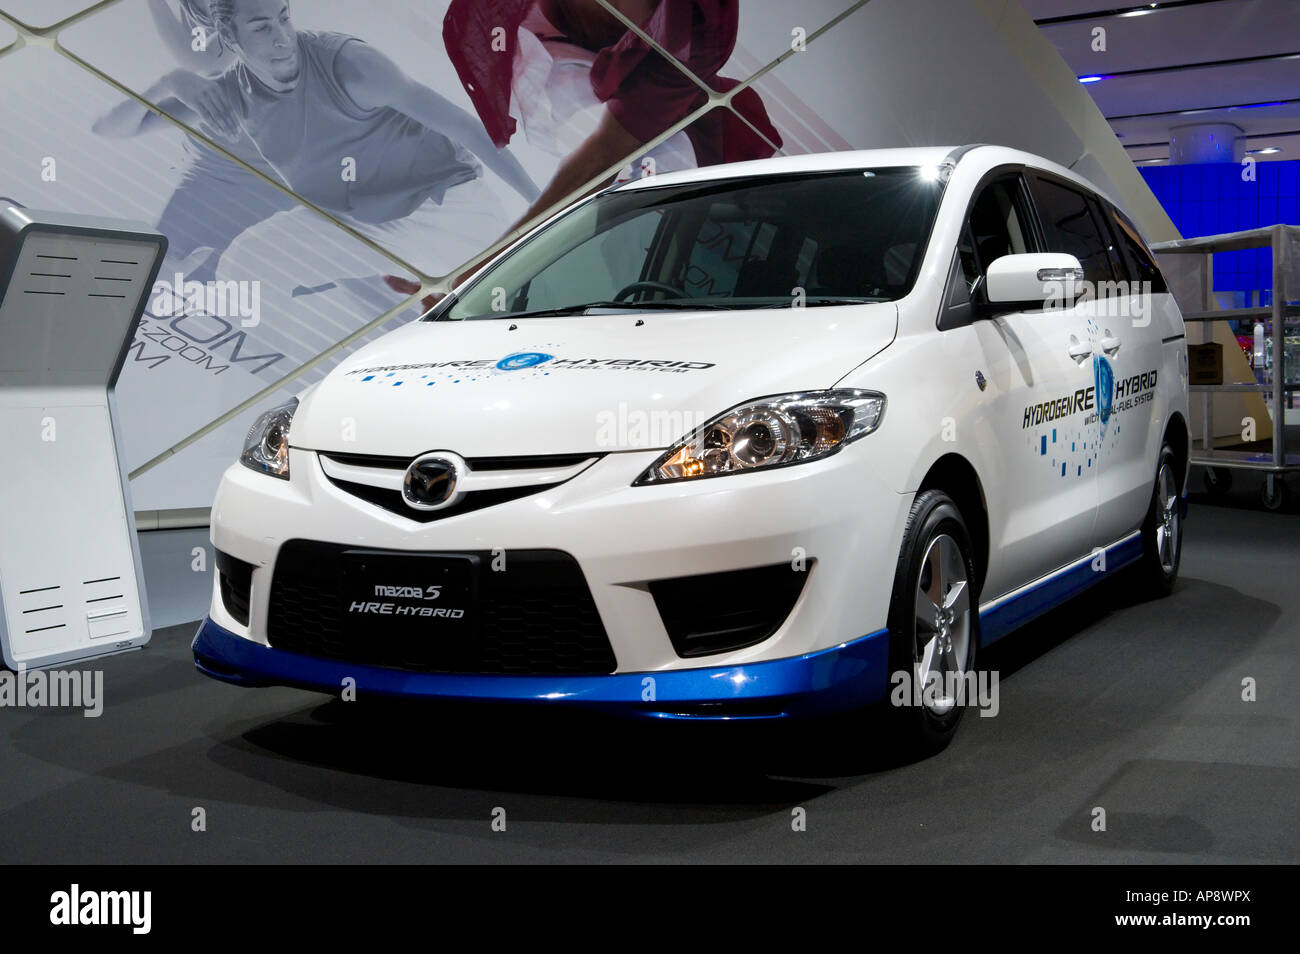 The Mazda 5 Hydrogen RE Hybrid at the 2008 North American International Auto Show in Detroit Michigan Stock Photo